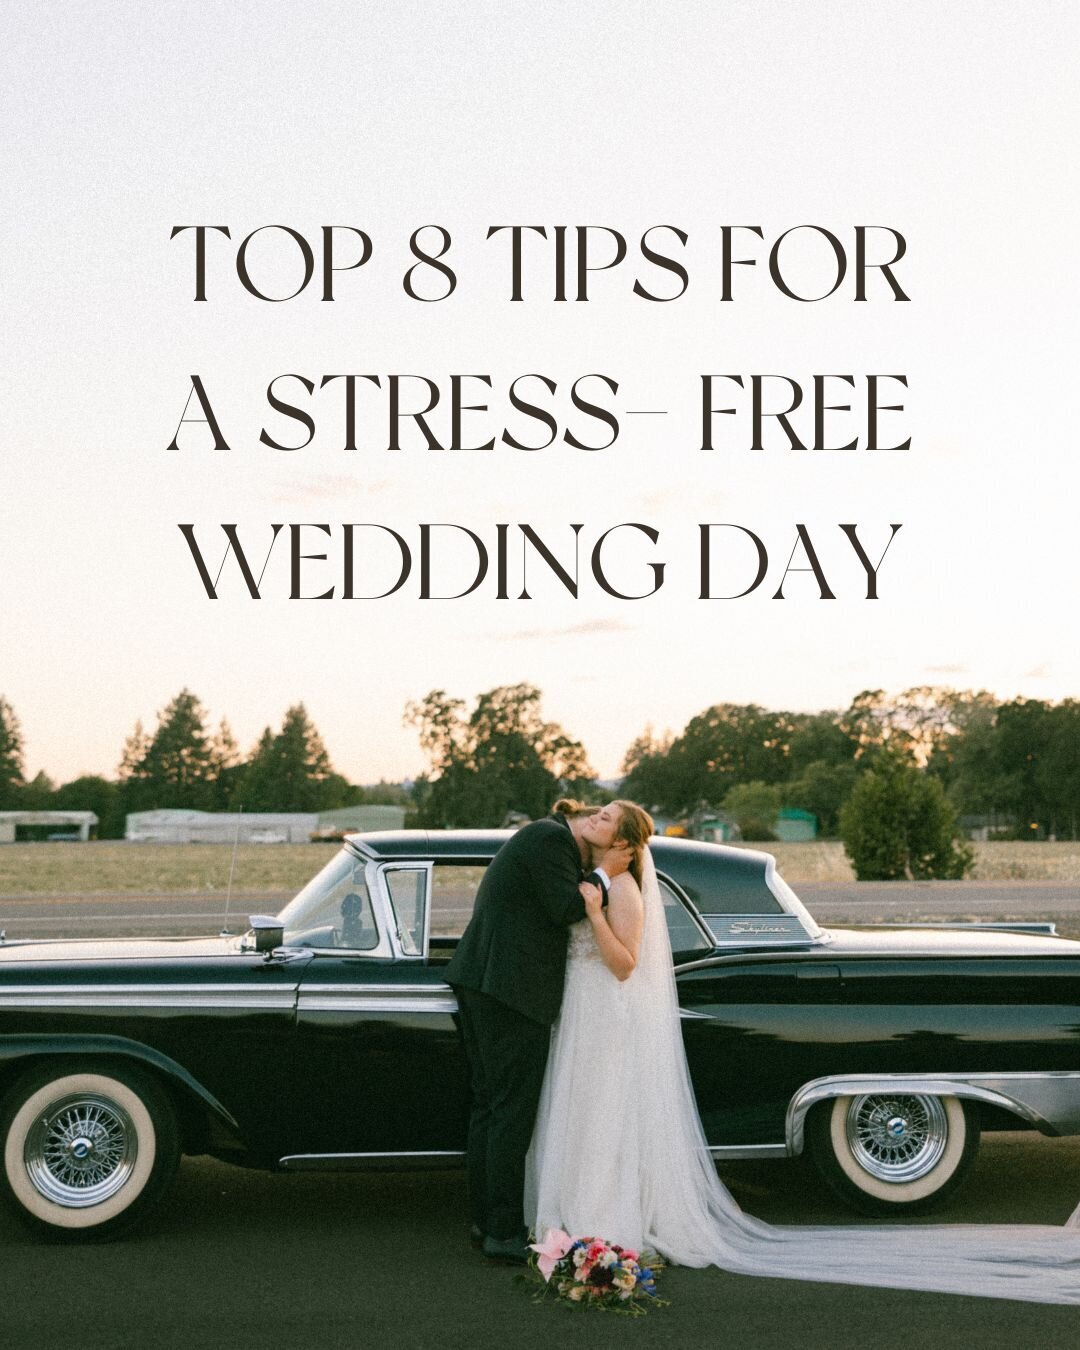 wedding day tips for bride to keep her day stress free